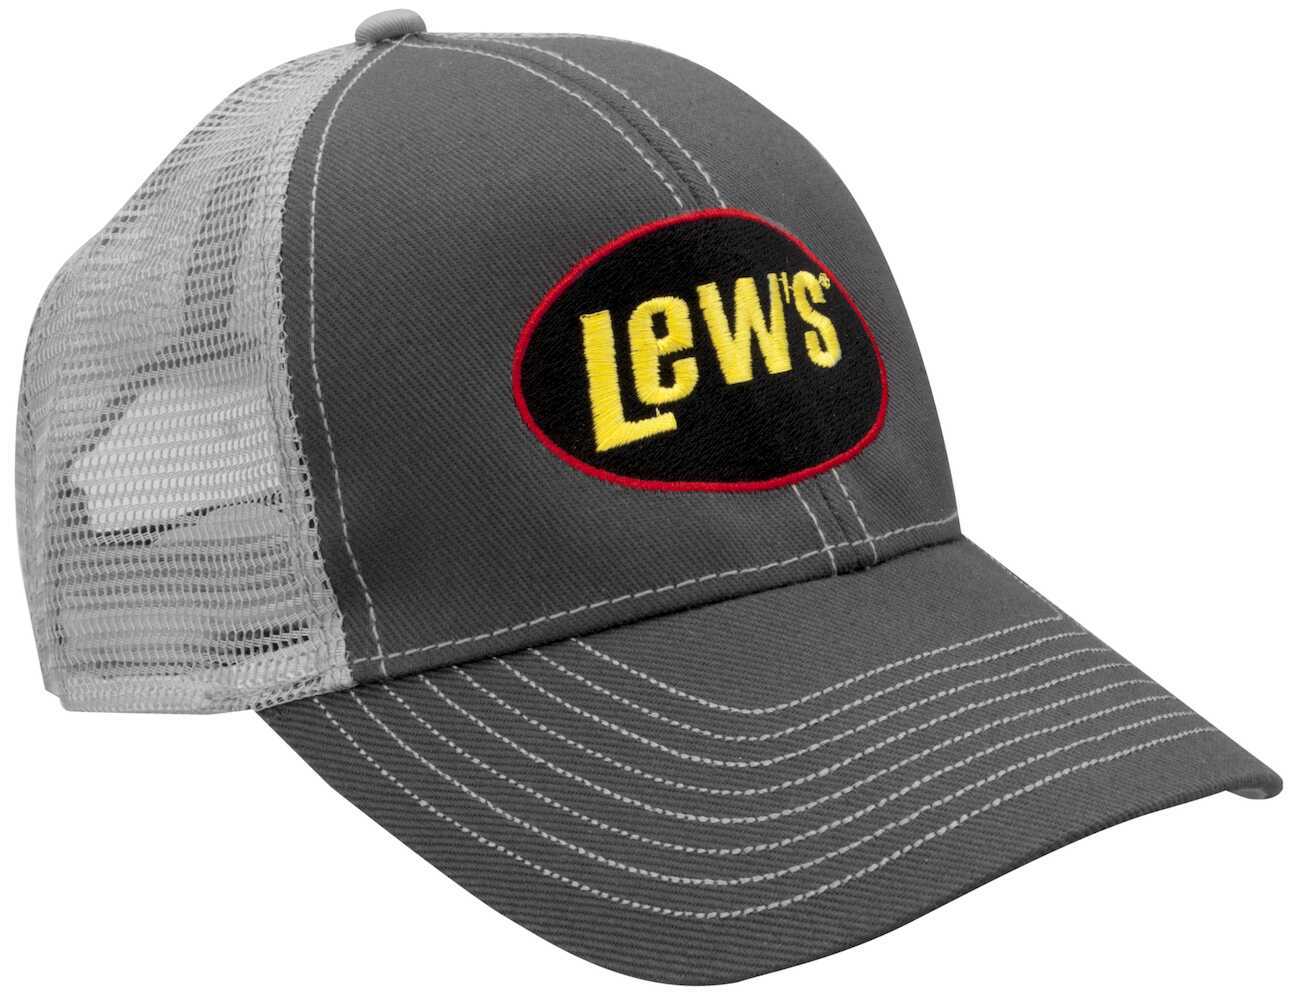 Lew's Gray/Chartreuse Mesh Large/XLarge Form Fitting Cap Hat Gray Logo NEW 